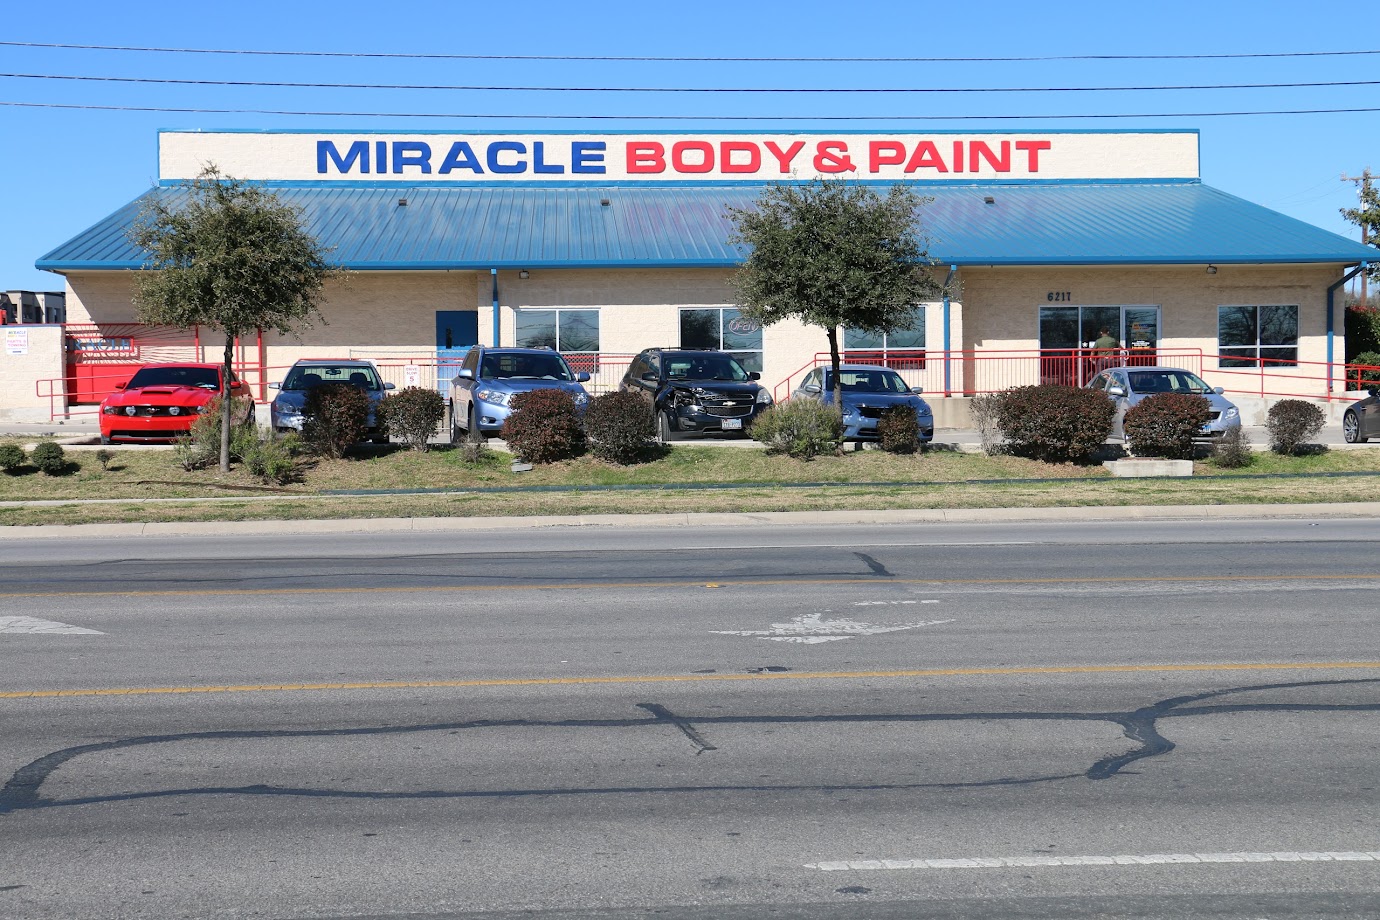 Miracle Body and Paint